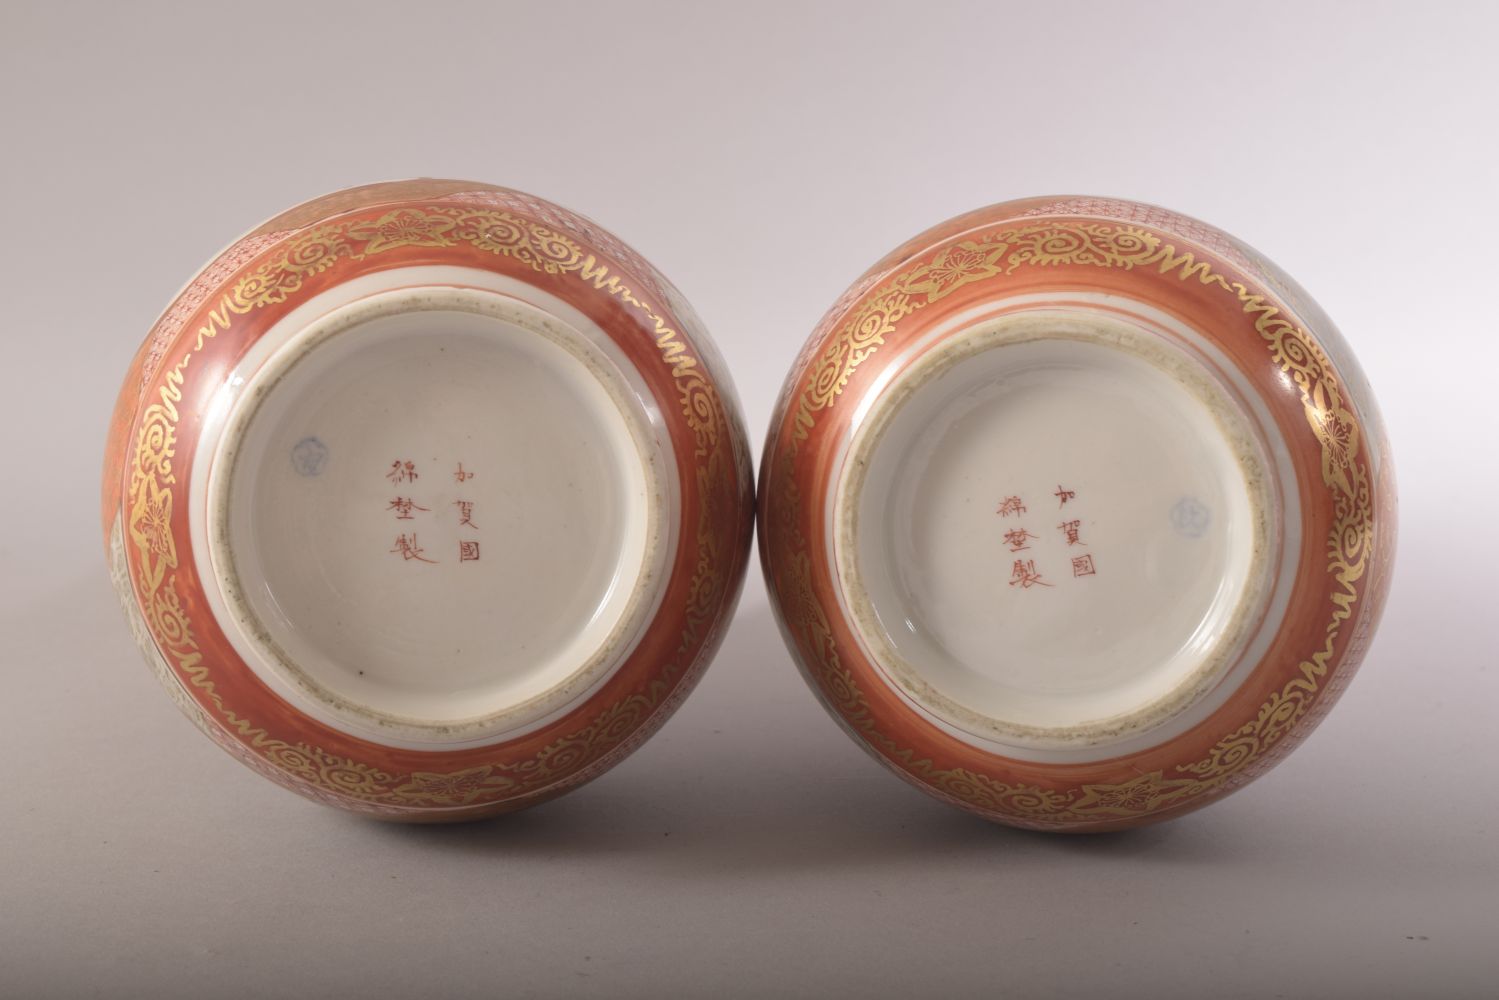 A PAIR OF JAPANESE KUTANI PORCELAIN VASES, each painted with a panel depicting two figures at a - Image 6 of 8